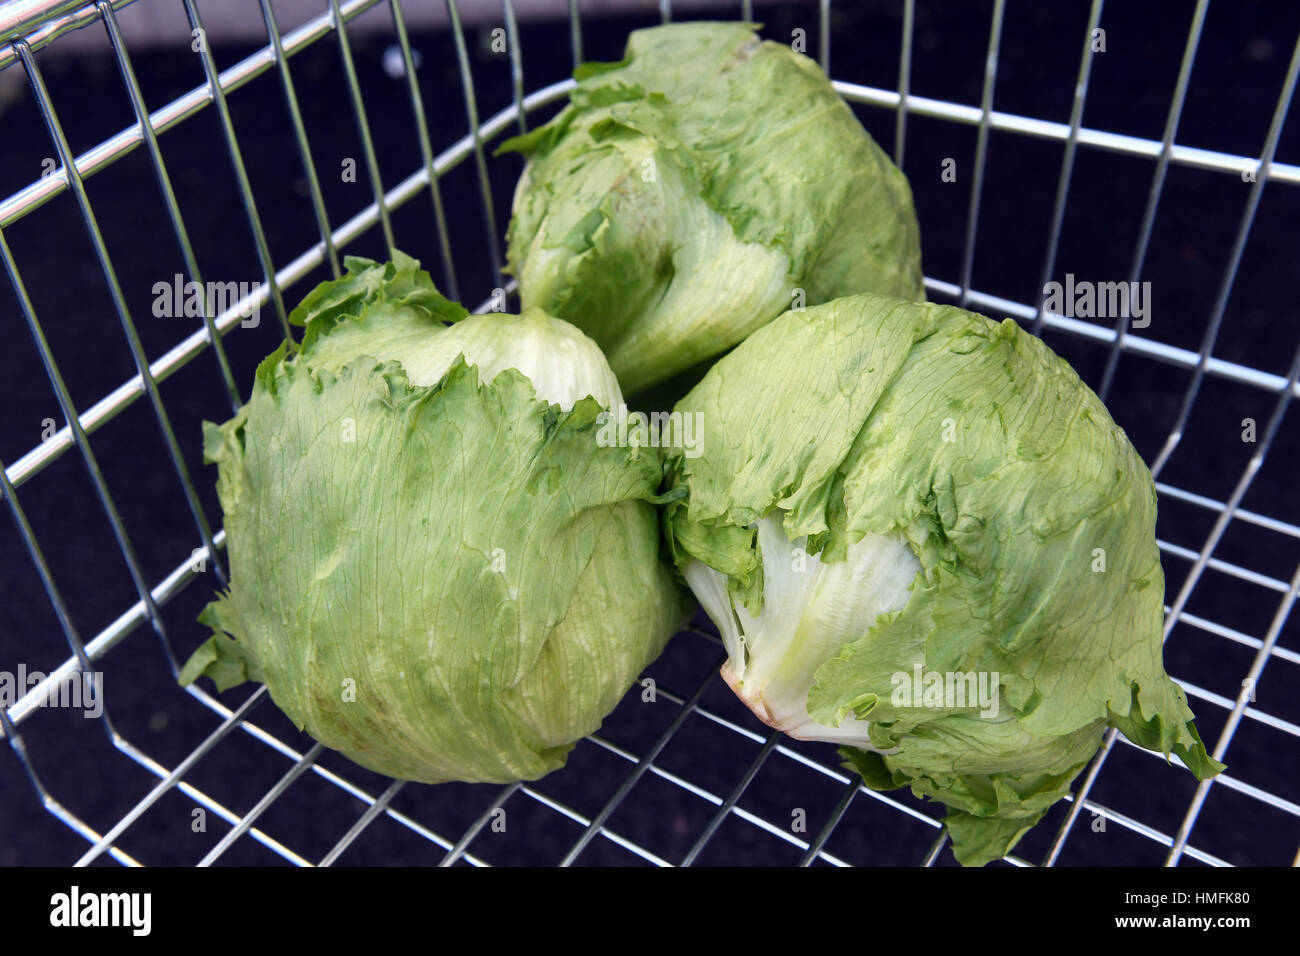 Purchases of iceberg lettuce are limited to three per customer at a Tesco store in Kennington, London, as lettuce became the latest staple to fall victim to the European vegetable shortage 'crisis'. Stock Photo